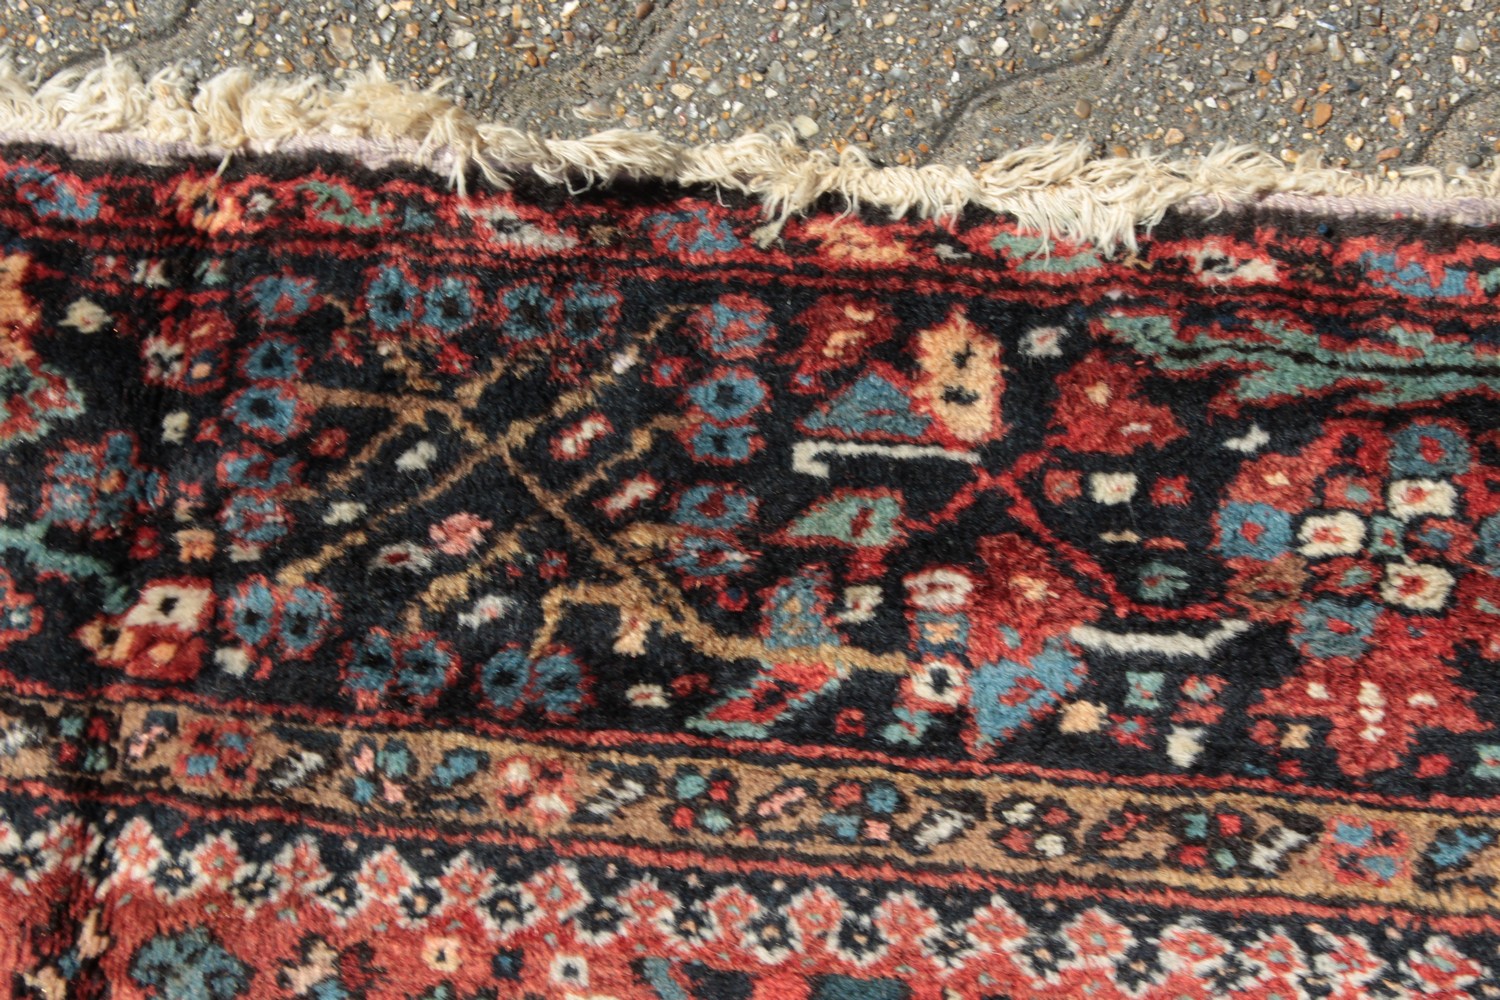 A LARGE PERSIAN KARAJA CARPET with seven central medallions in red and blue. 10ft 10ins x 7ft 4ins. - Image 5 of 11